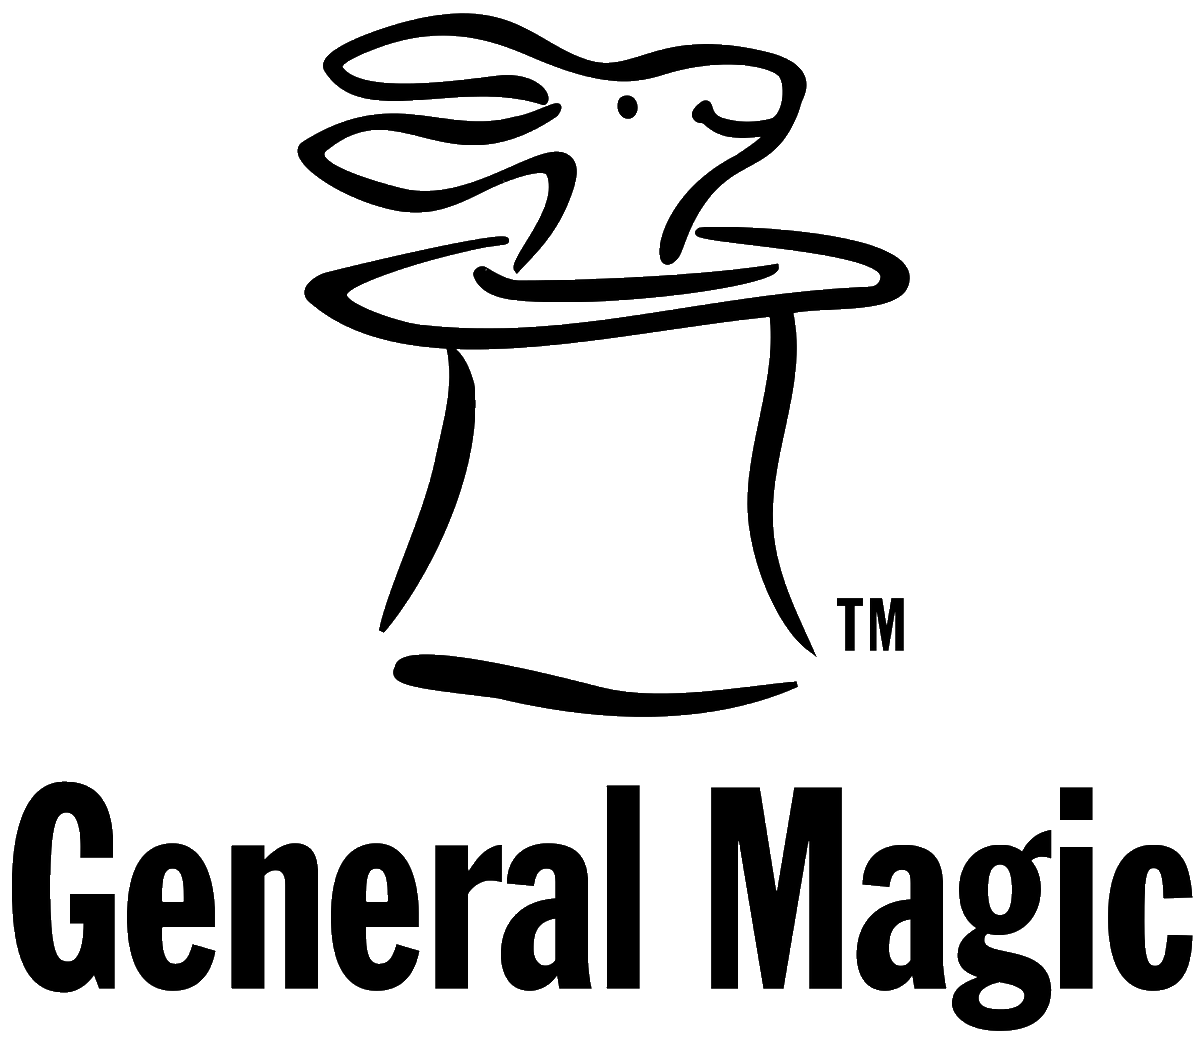 1991/92 - Fadell graduates from the University of Michigan with a BS in Computer Engineering.He reads a rumour about the founding team of the Mac spinning off into a new company - General Magic.After a relentless pursuit, Fadell joins as a diagnostics engineer.3/